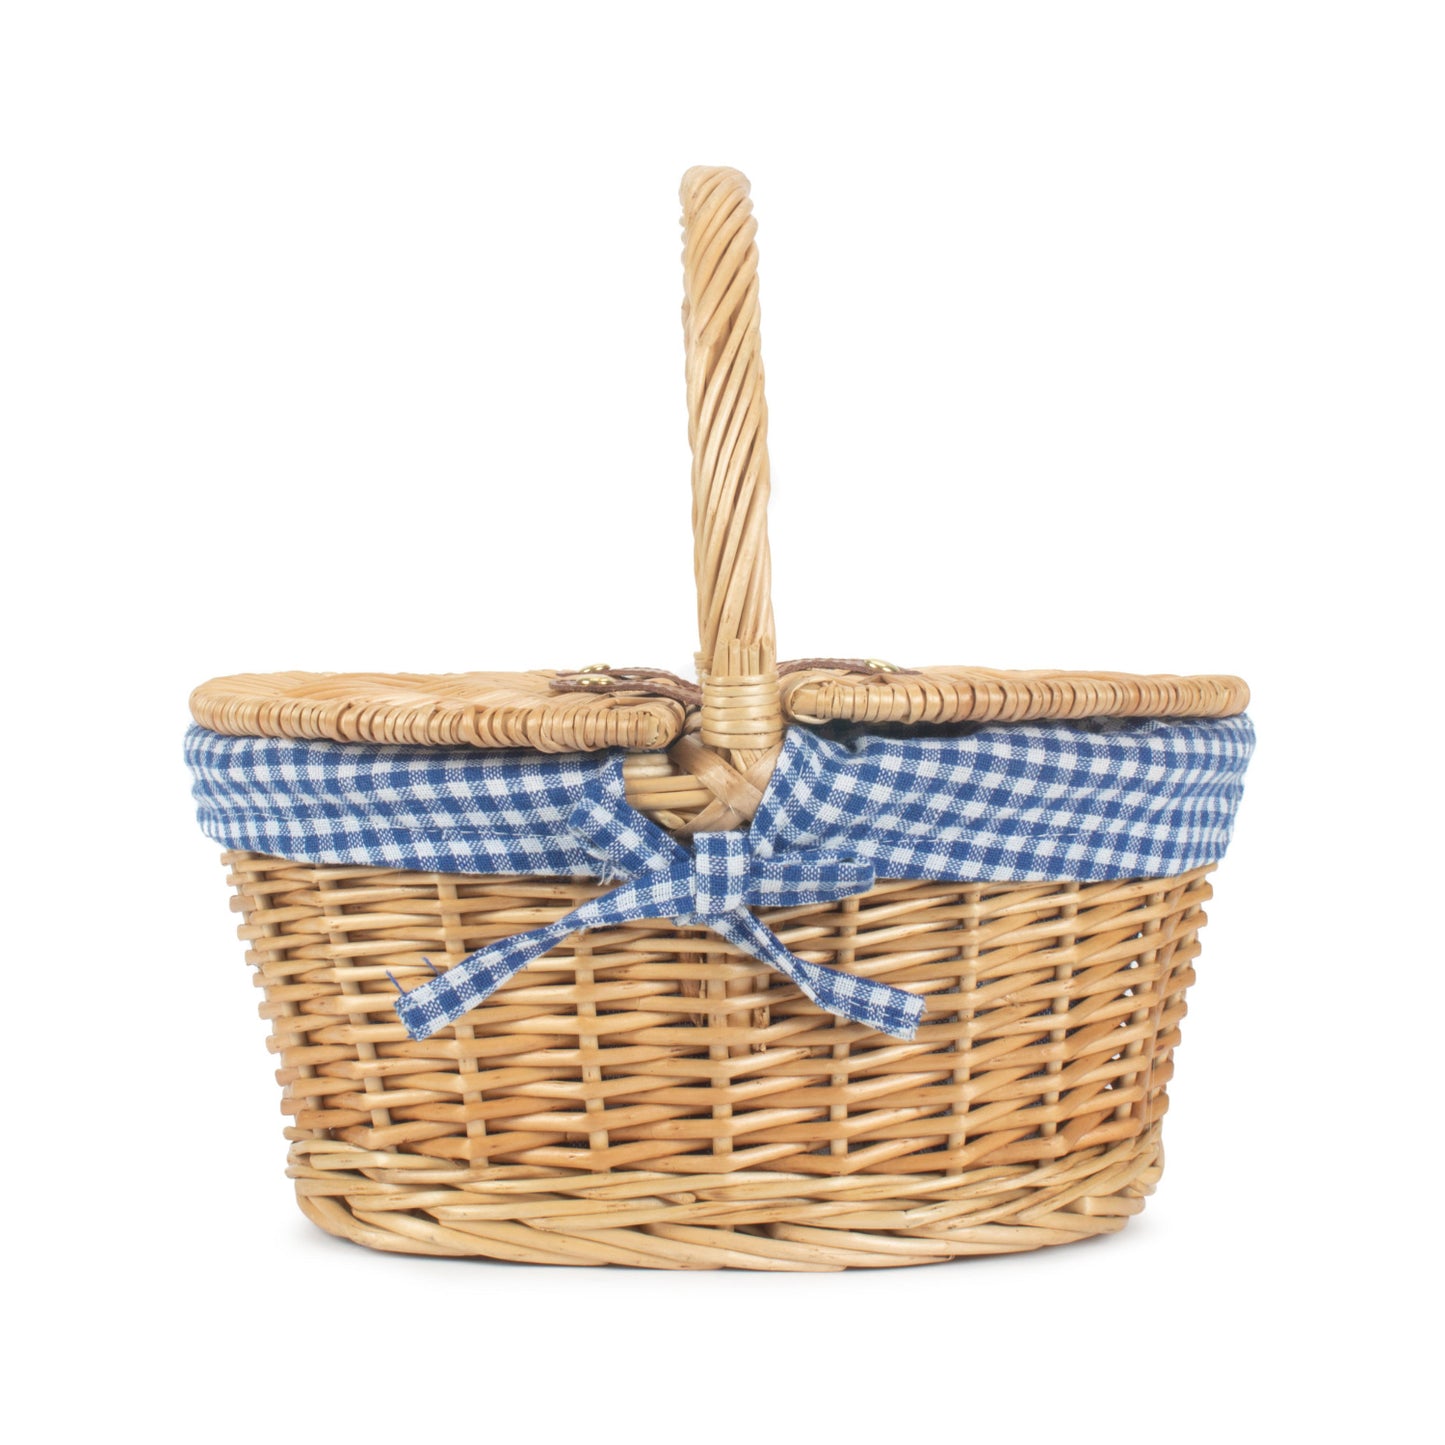 Child's Oval Lined Lidded Hamper With Blue & White Checked Lining